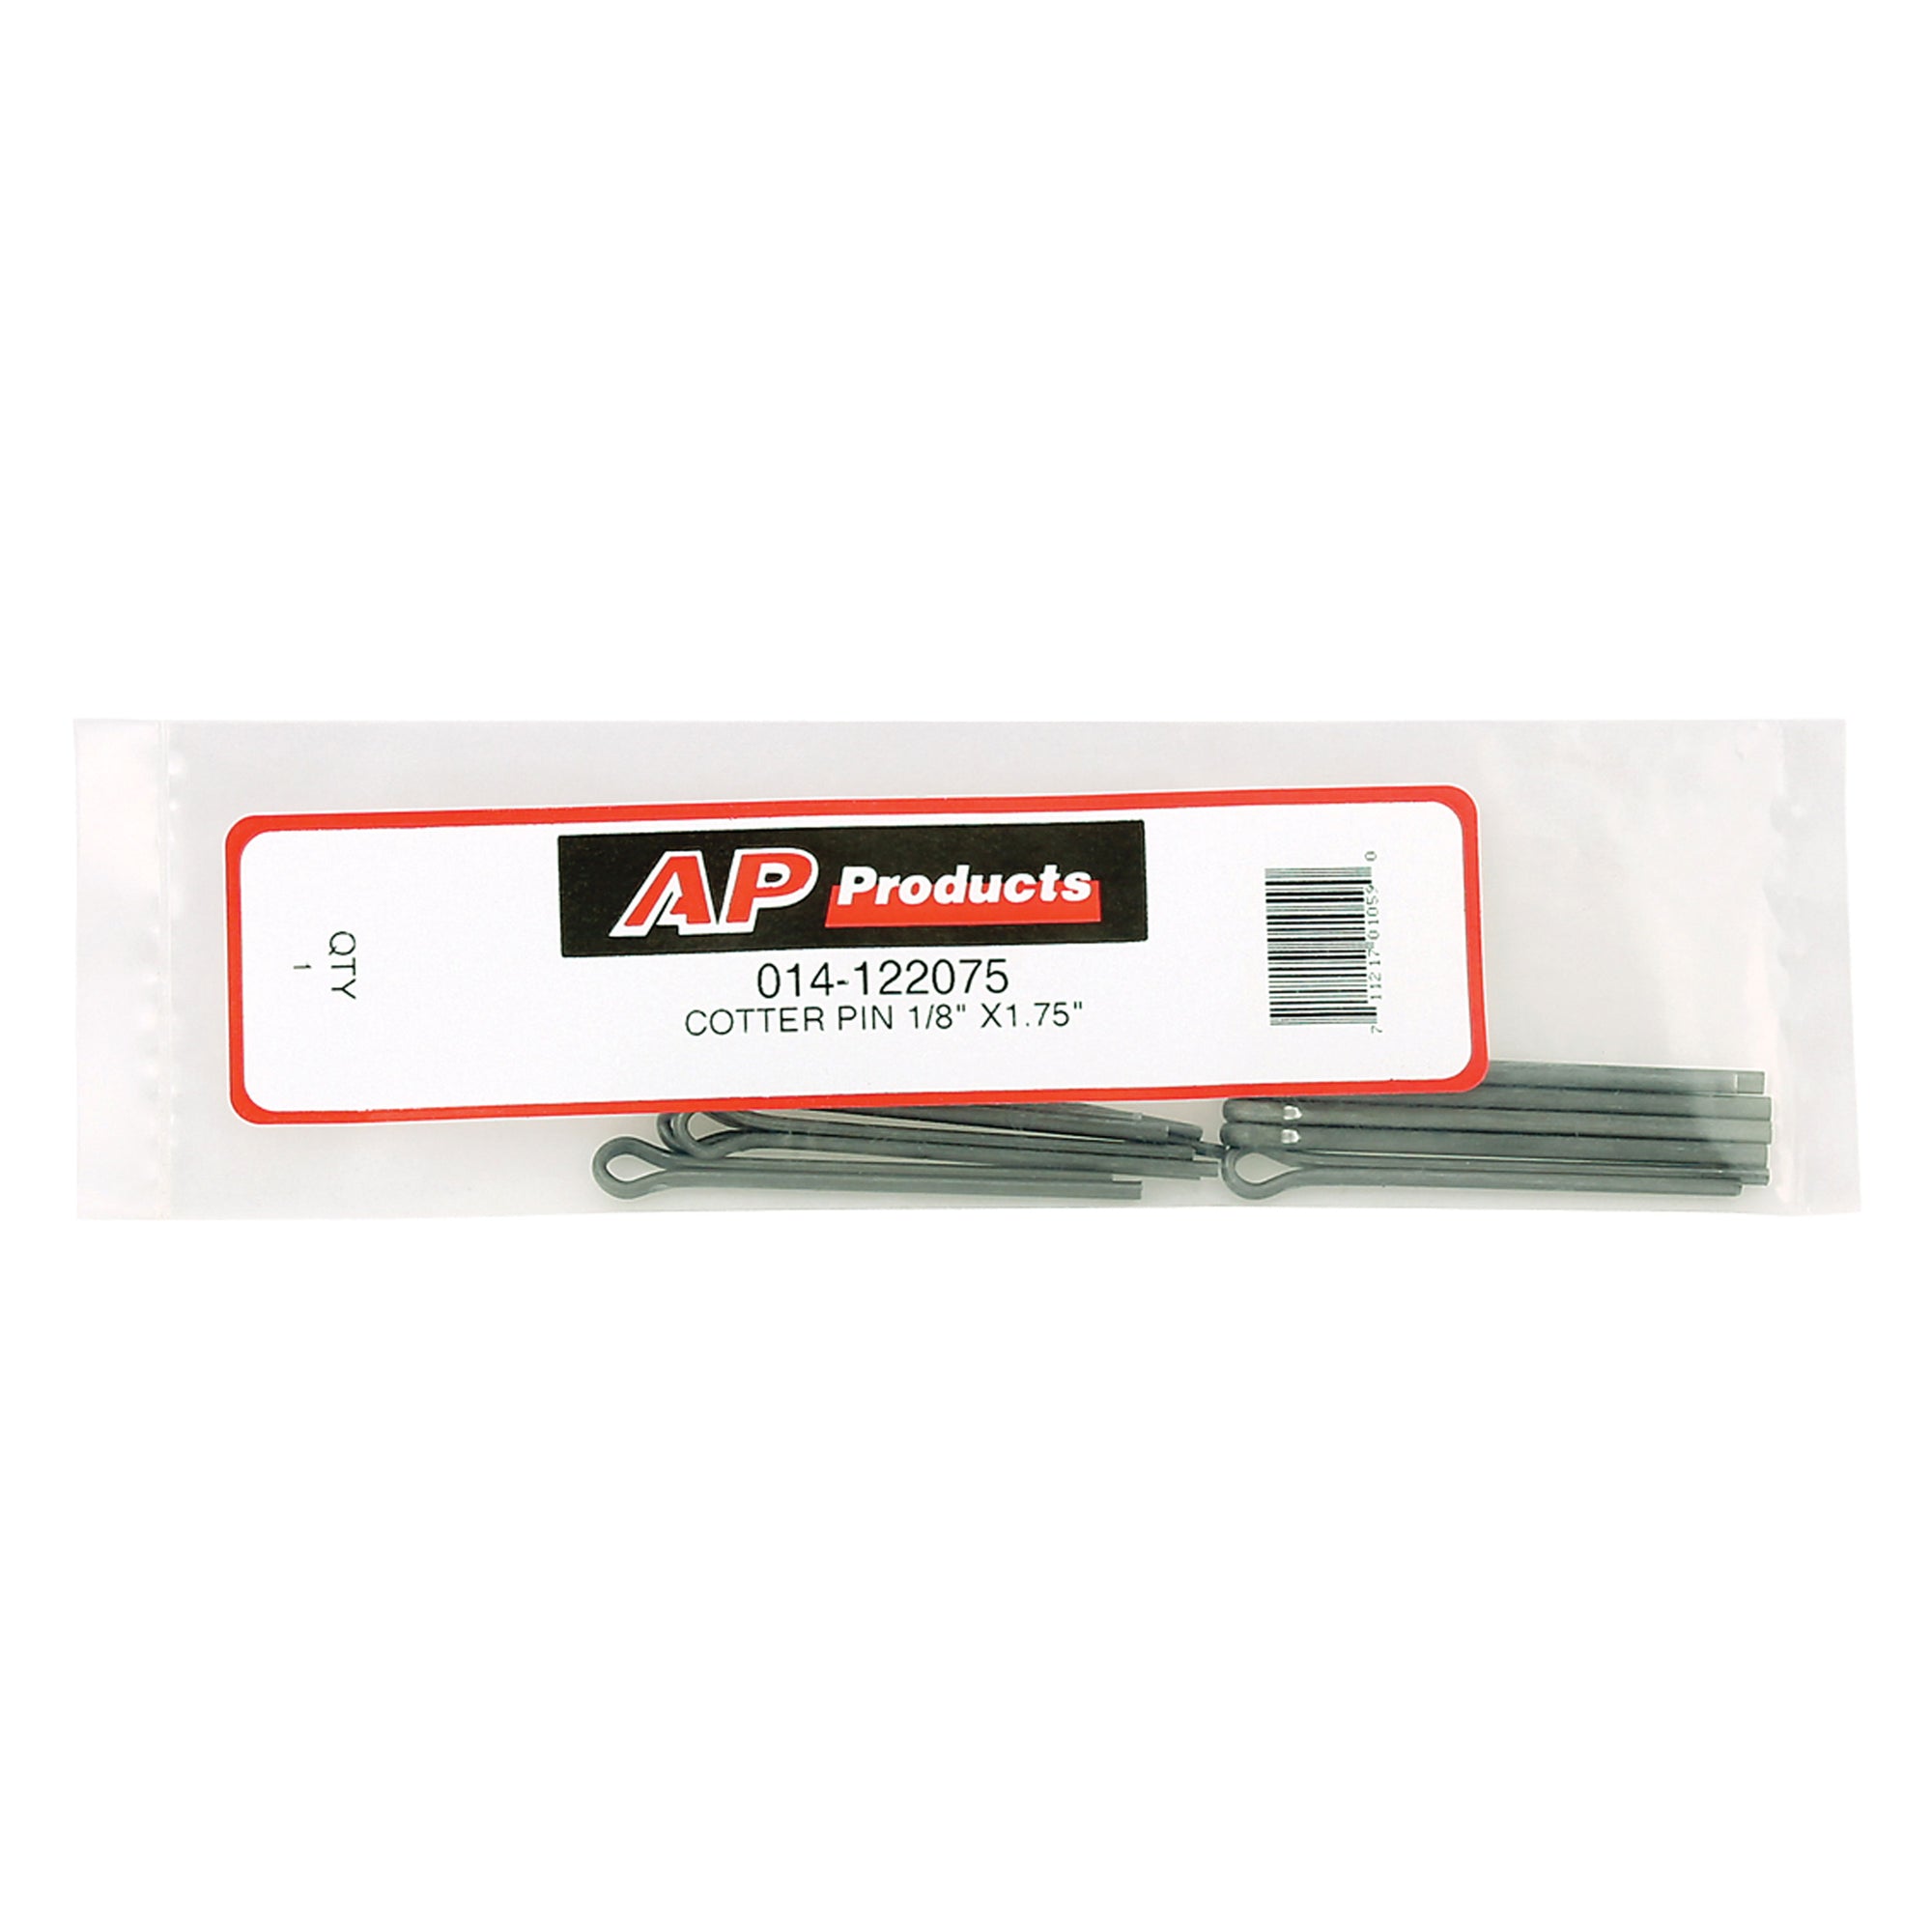 AP Products 014-122075-10 Cotter Pins - 0.125" x 1.75", 10 Pack